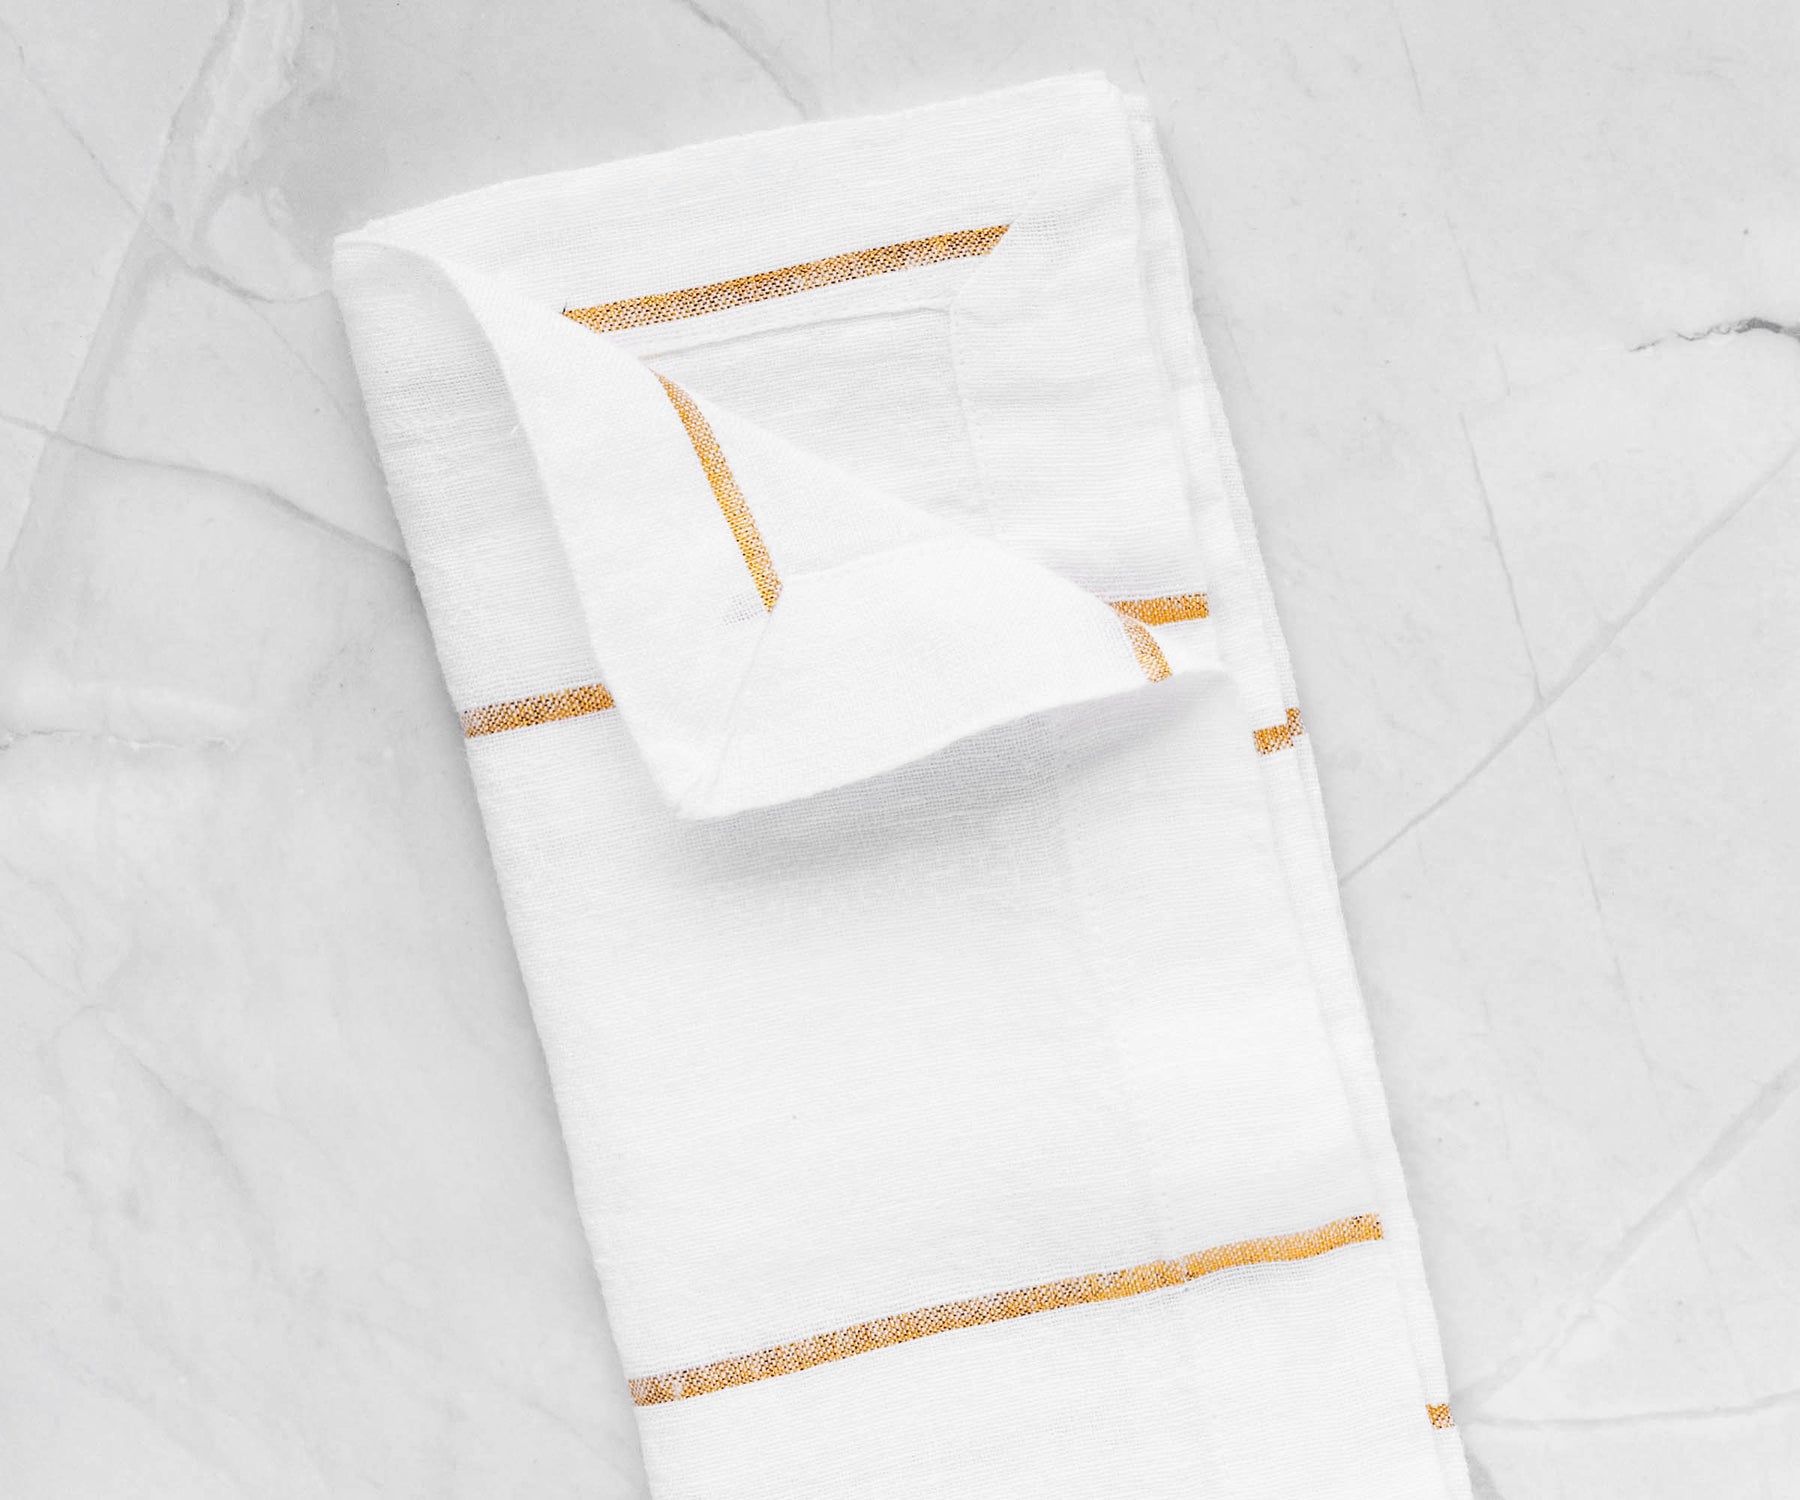 Elevate your dining experience with a diverse selection of dinner napkins, featuring both cloth and folding options, available in white and black variations.